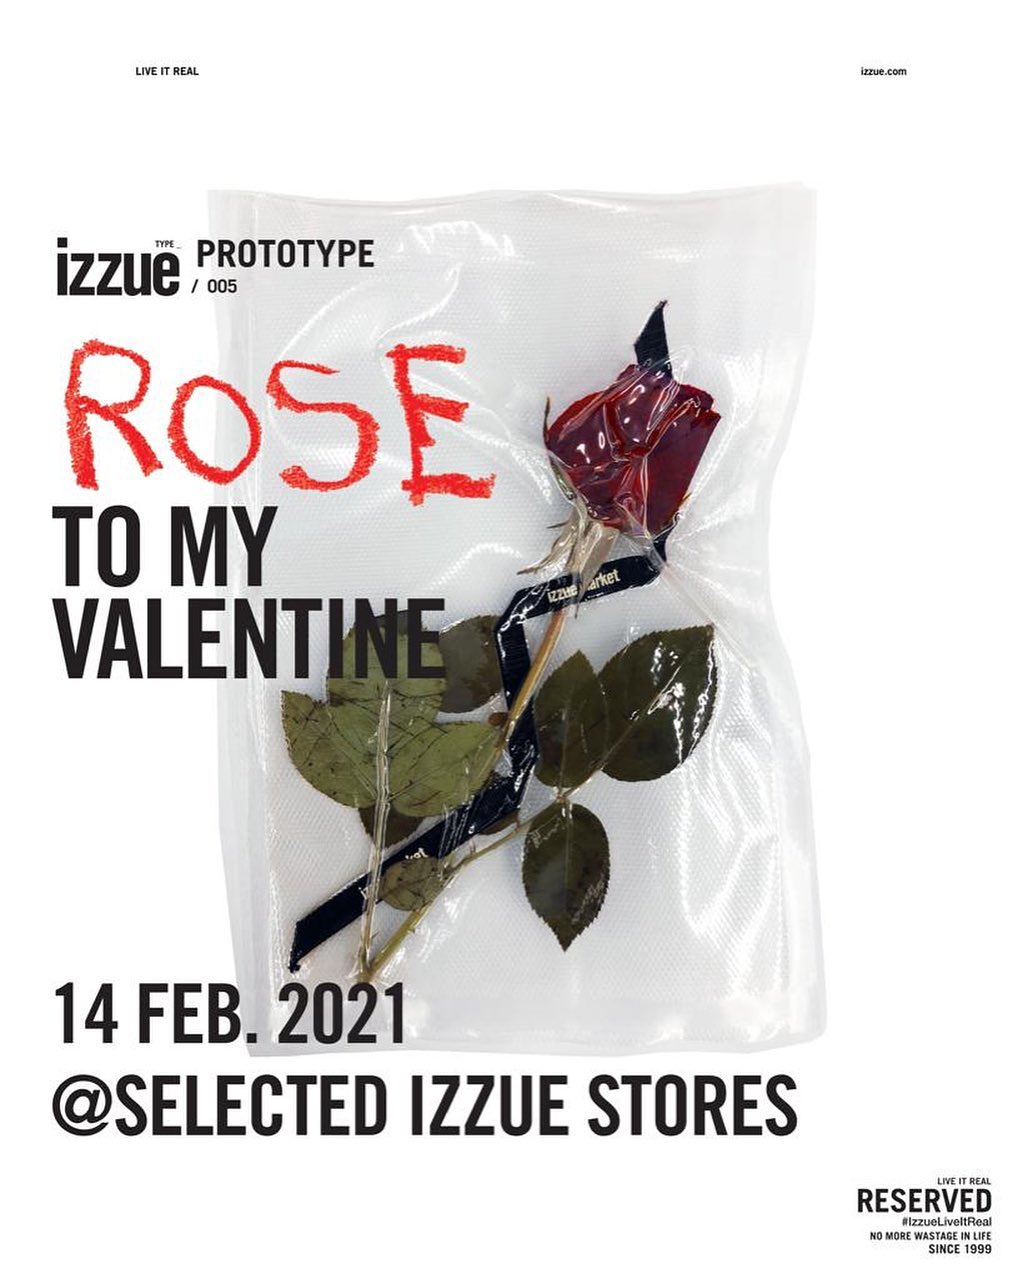 Valentine’s Day Celebration. Stay tuned with us! 🌹 Live it real, izzue yourself.  #VDAY #CNY ► Shop our latest collection now in the bio link.... @ithk @izzue_army